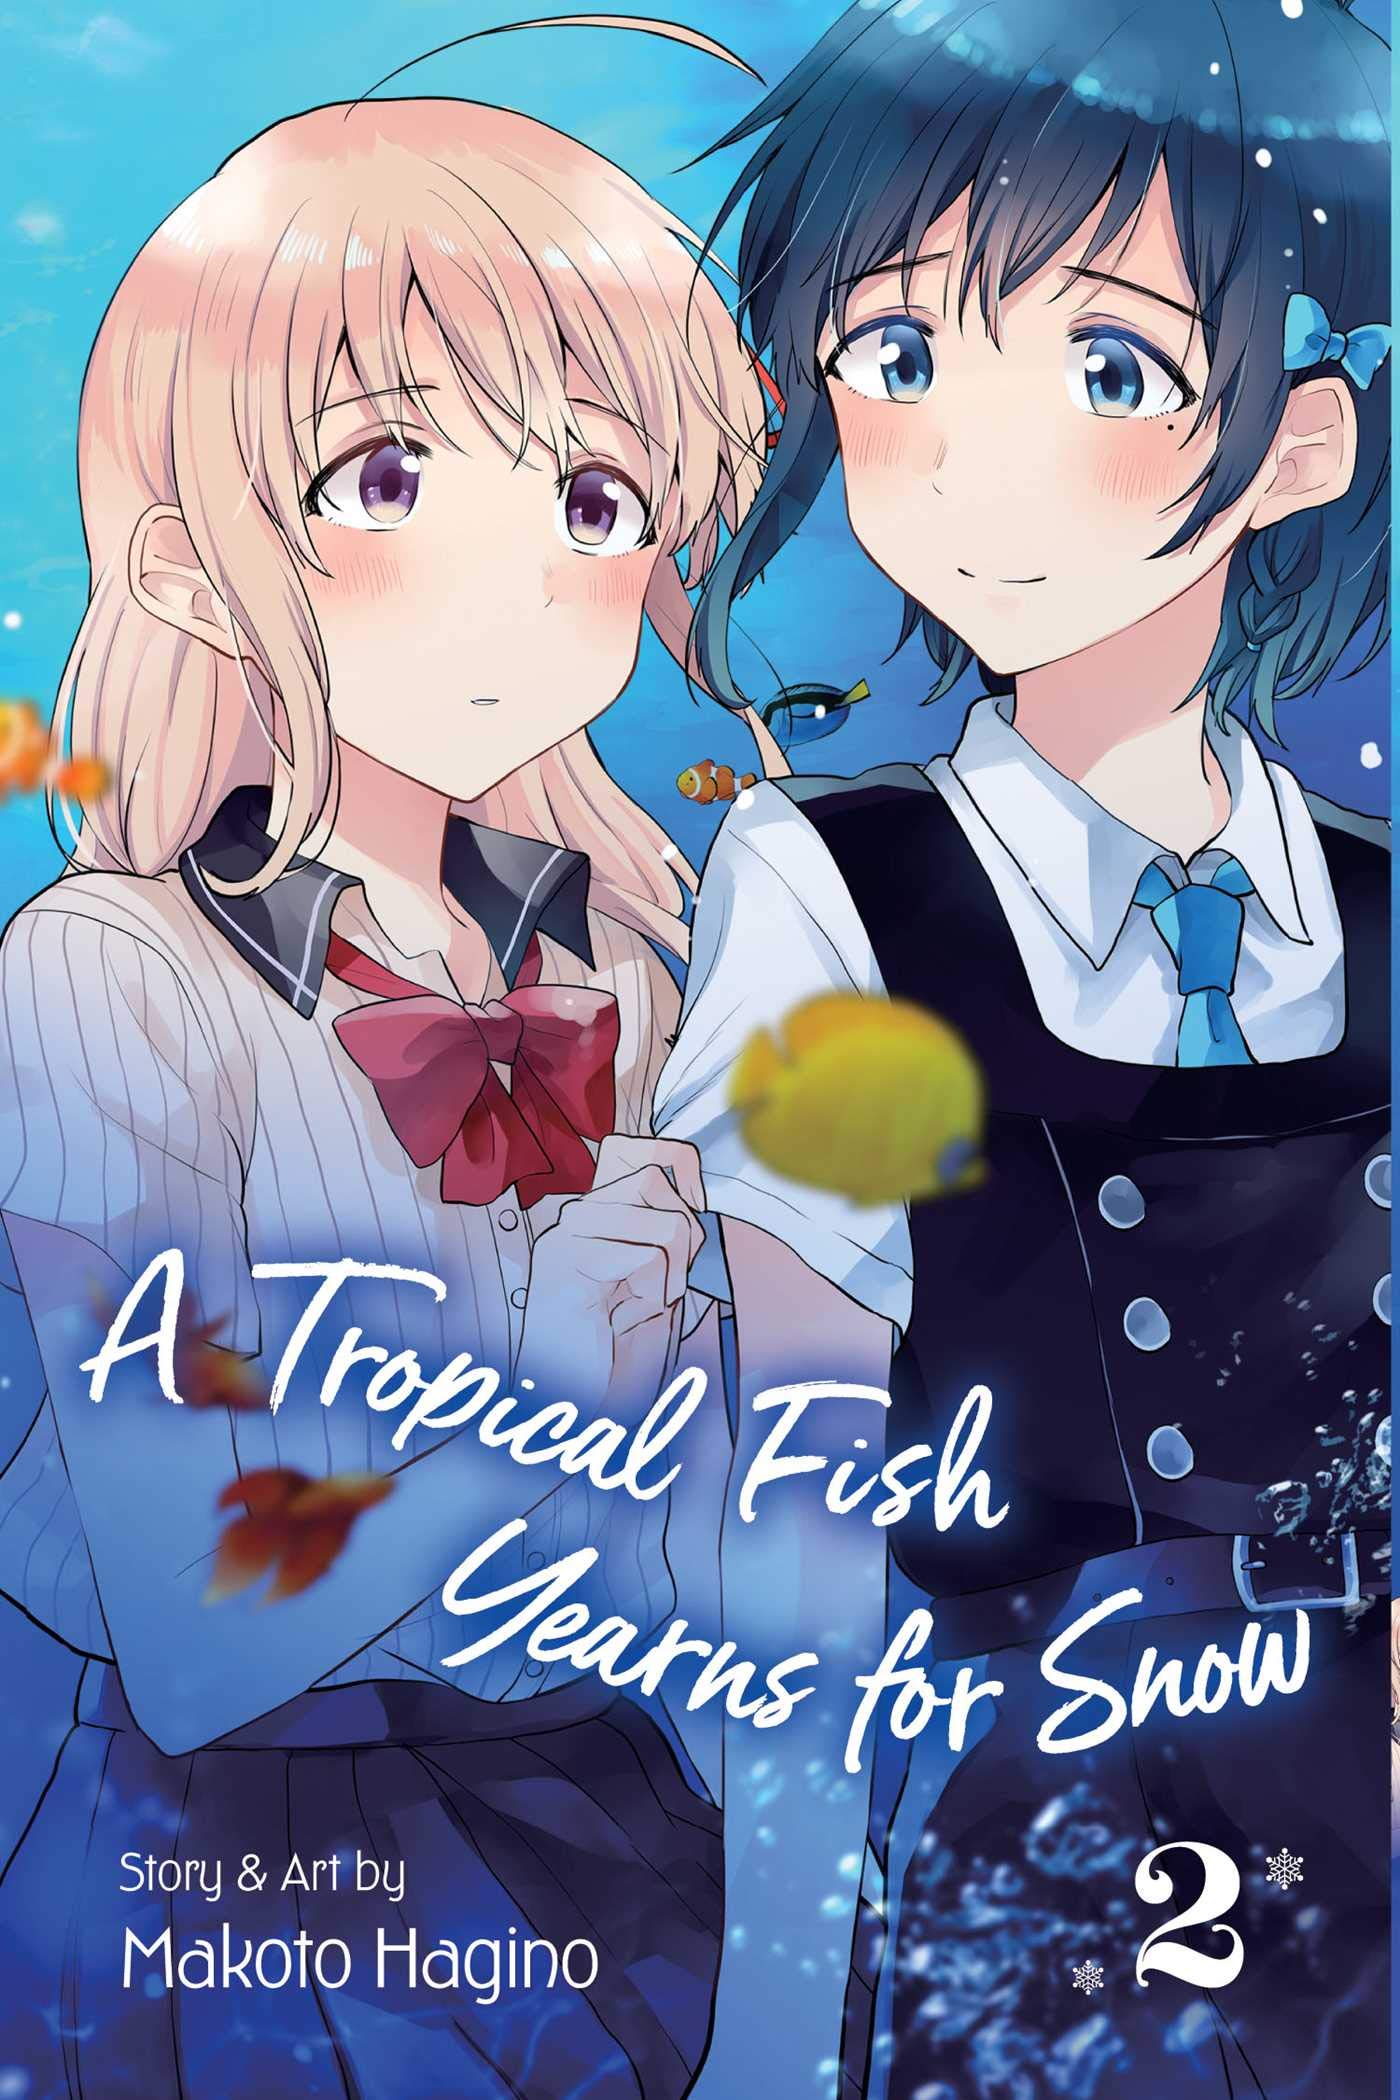 A Tropical Fish Yearns for Snow - Volume 2